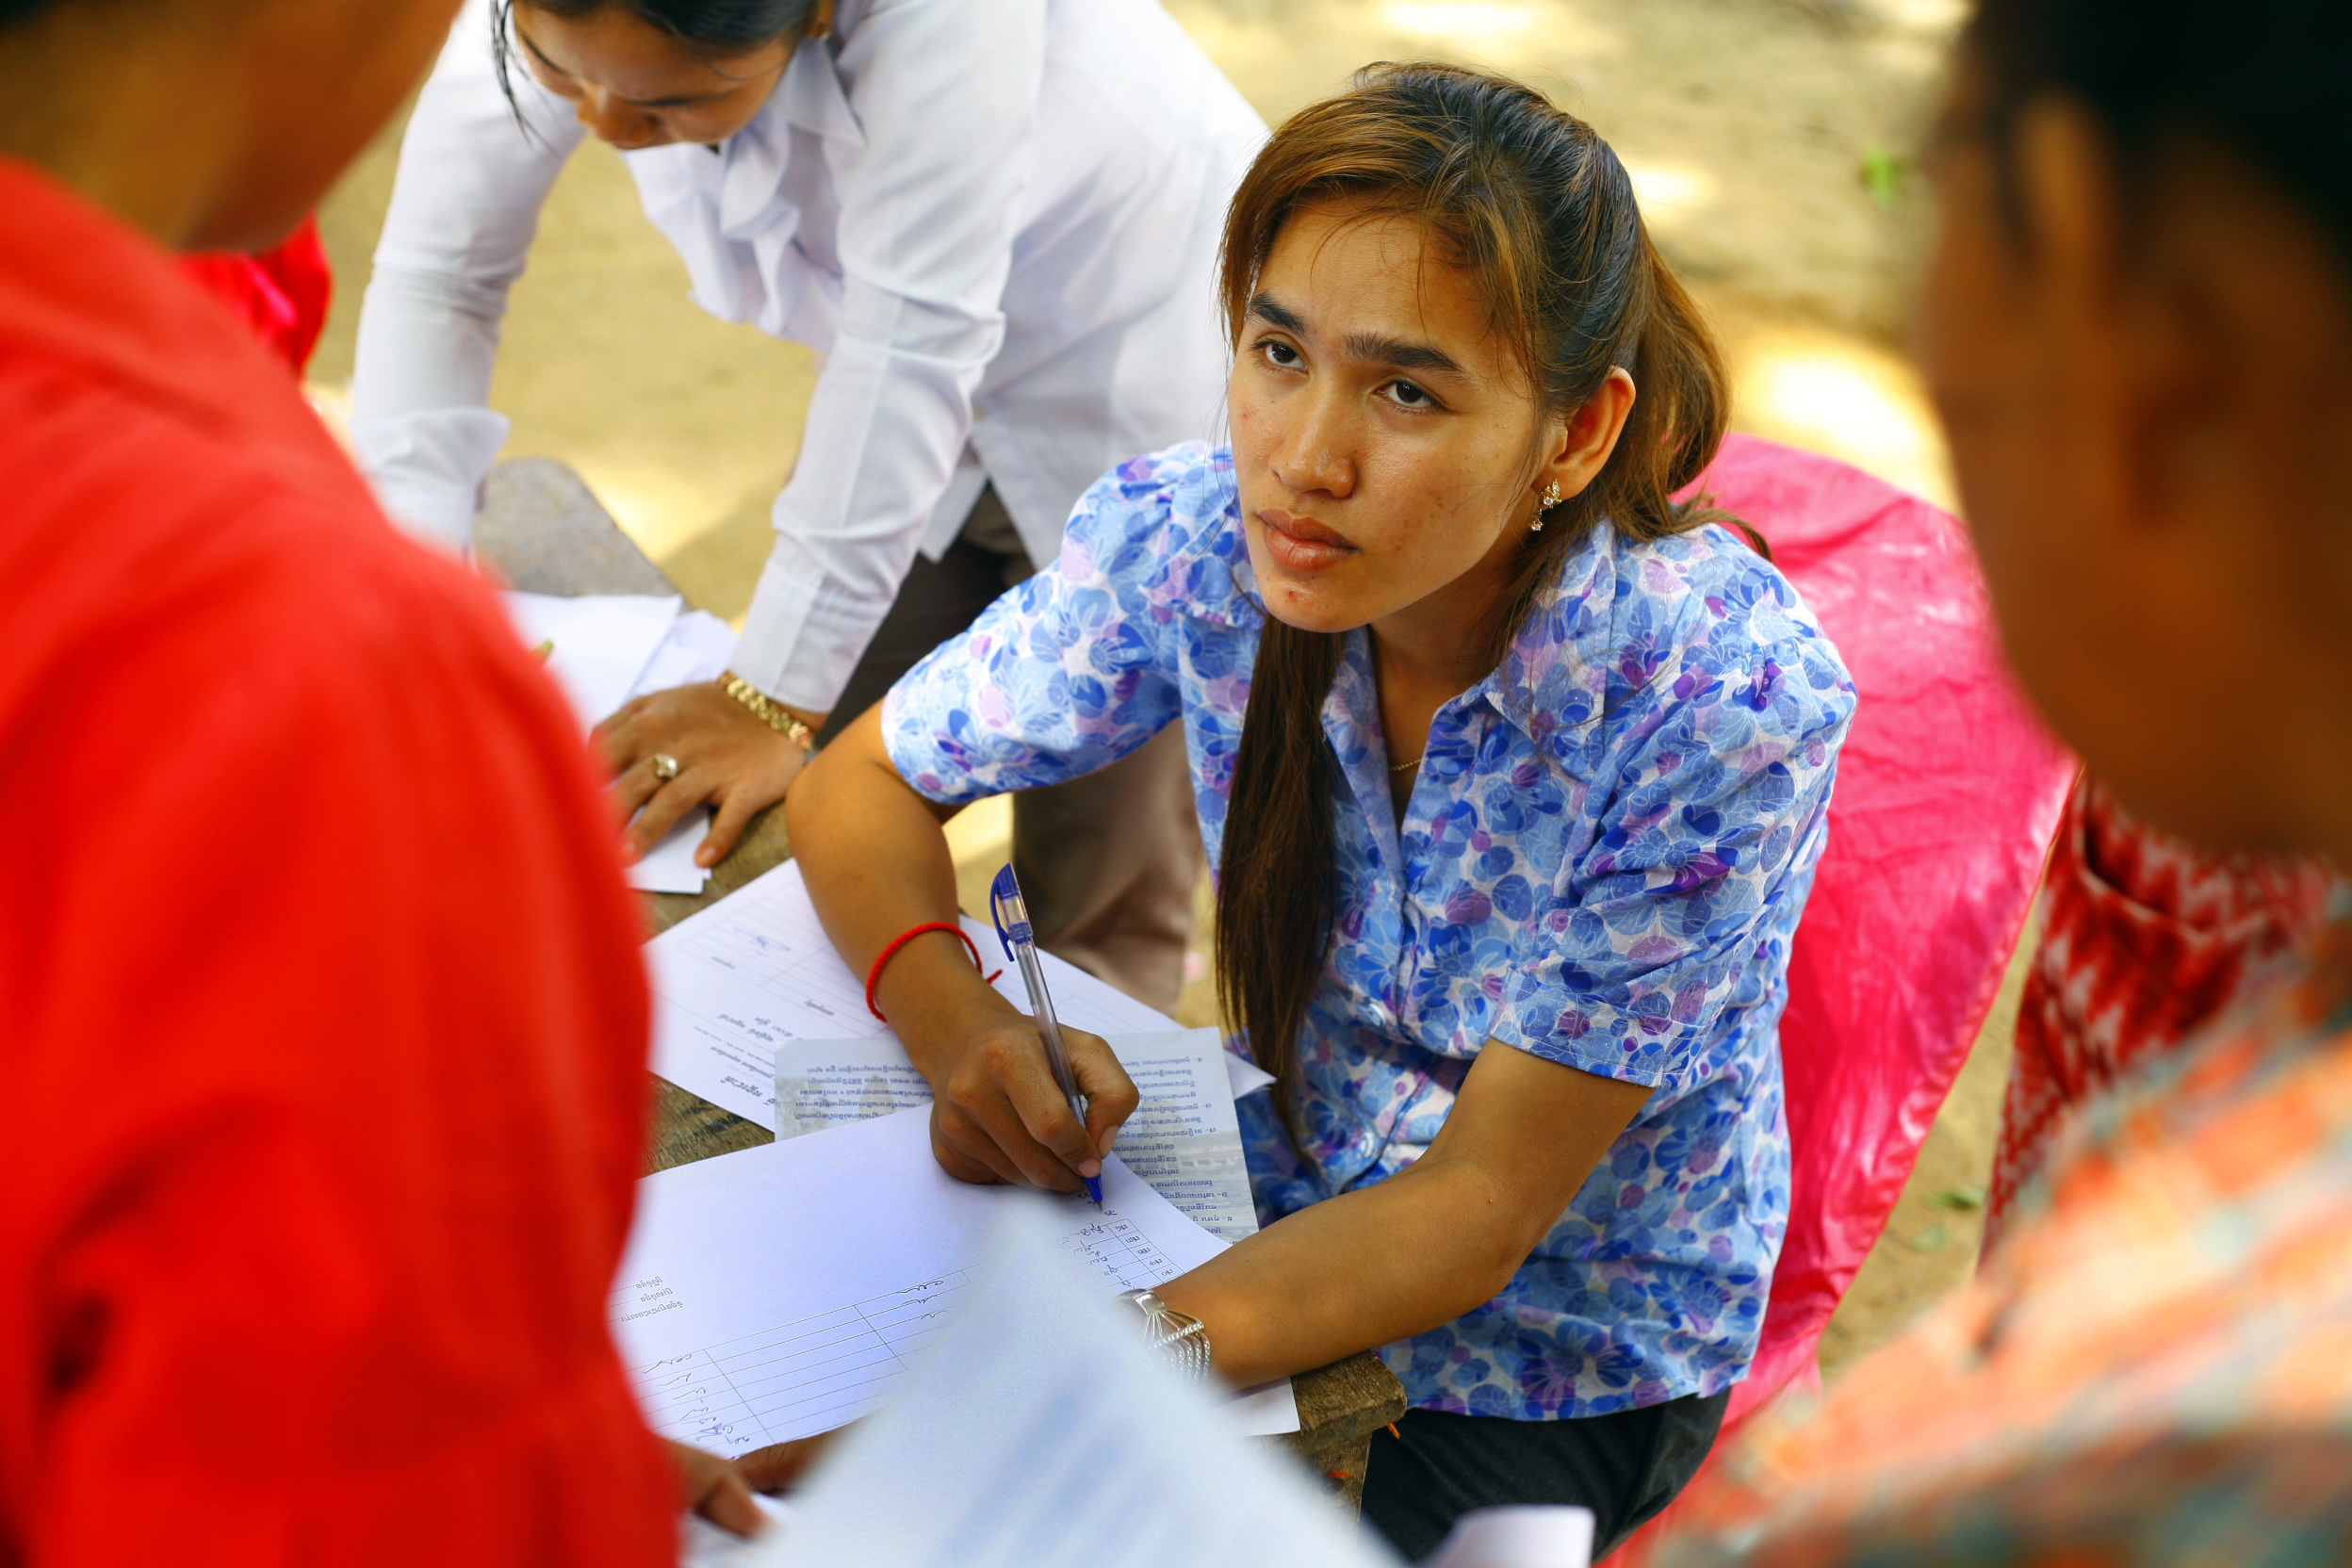 Cambodia Bridges to Justice employee fills out paperwork for a client